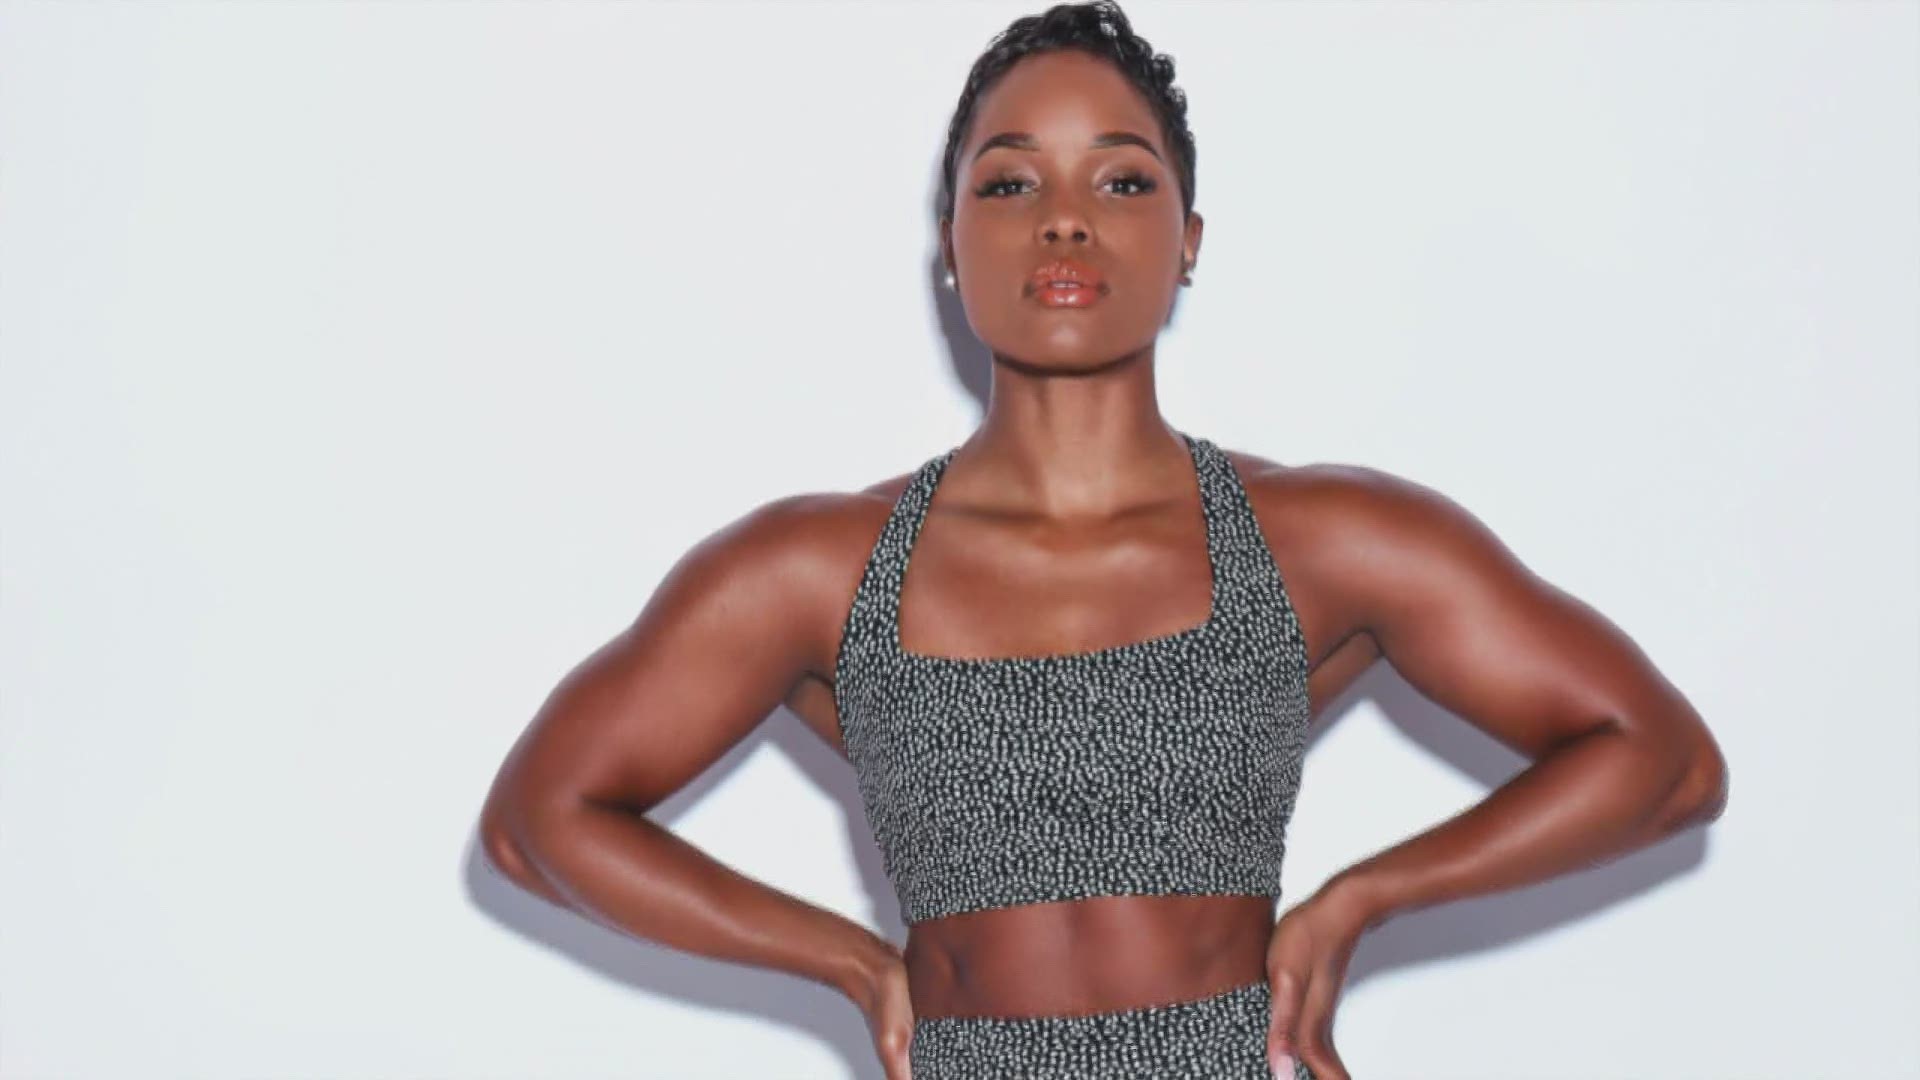 This fitness motivator is getting women moving.